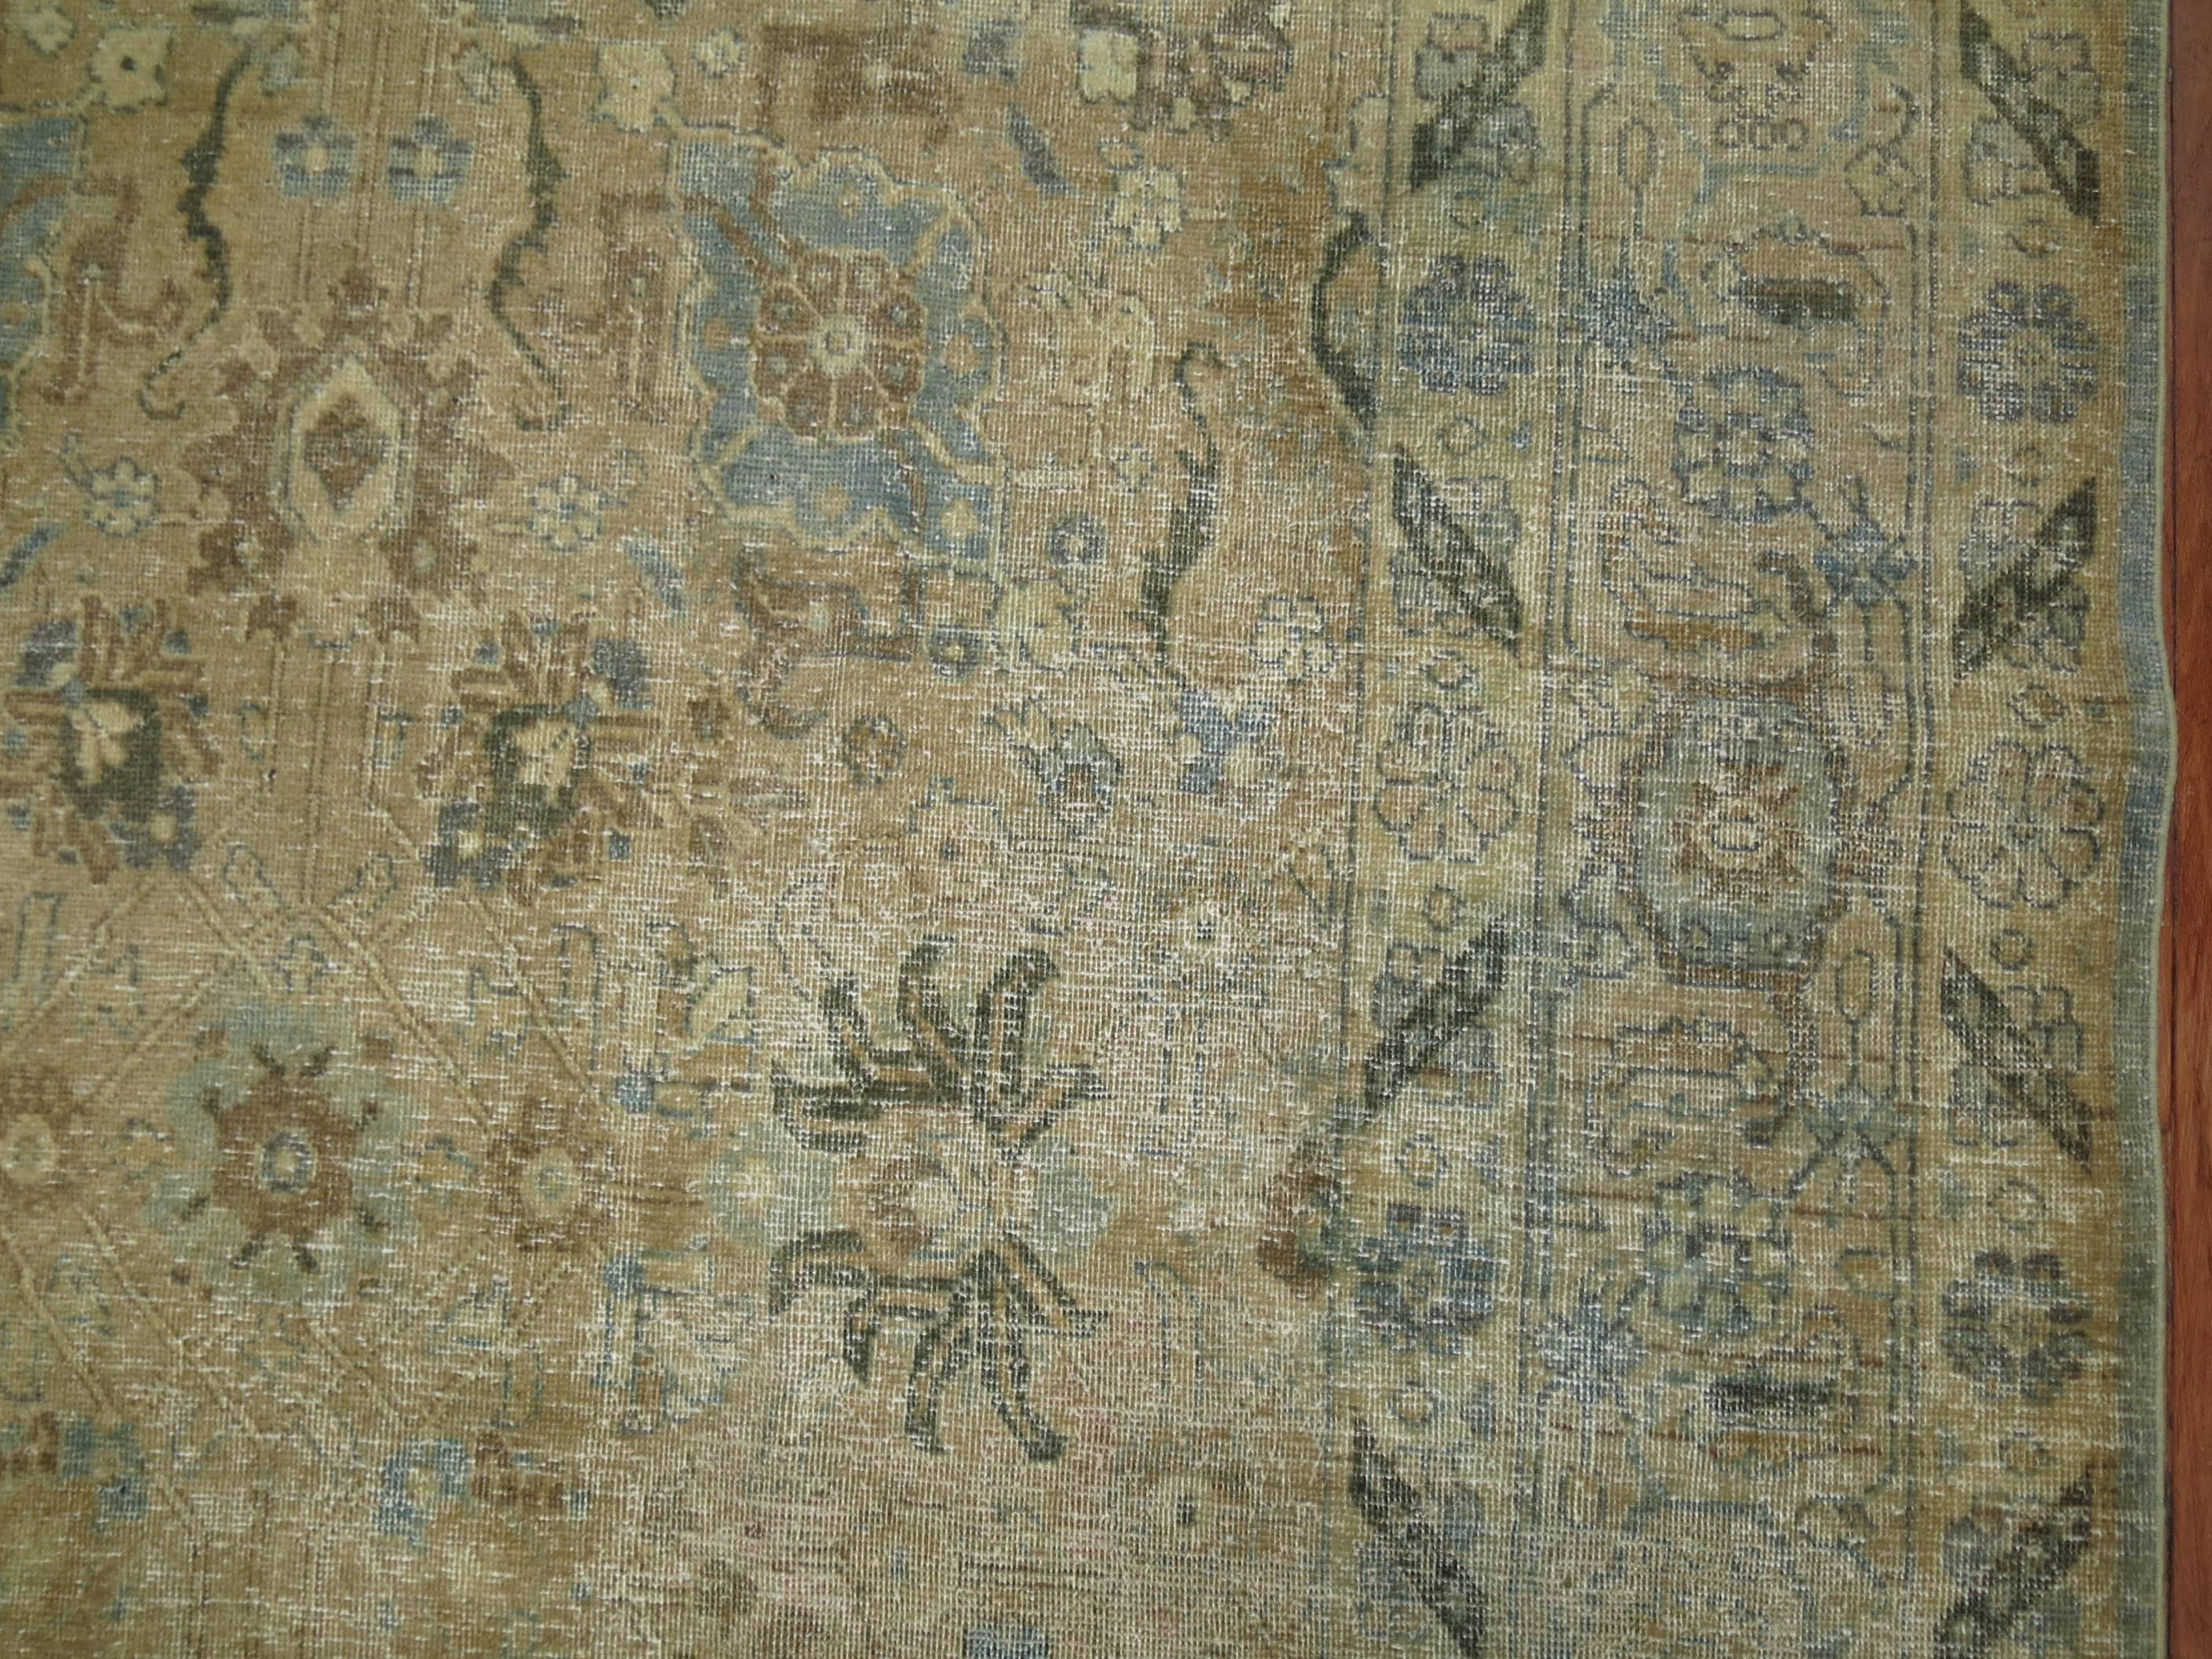 Antique Persian Tabriz rug in camel, brown, blue from the 1920s. Great wear and texture throughout the piece.

7'5'' x 10'8''